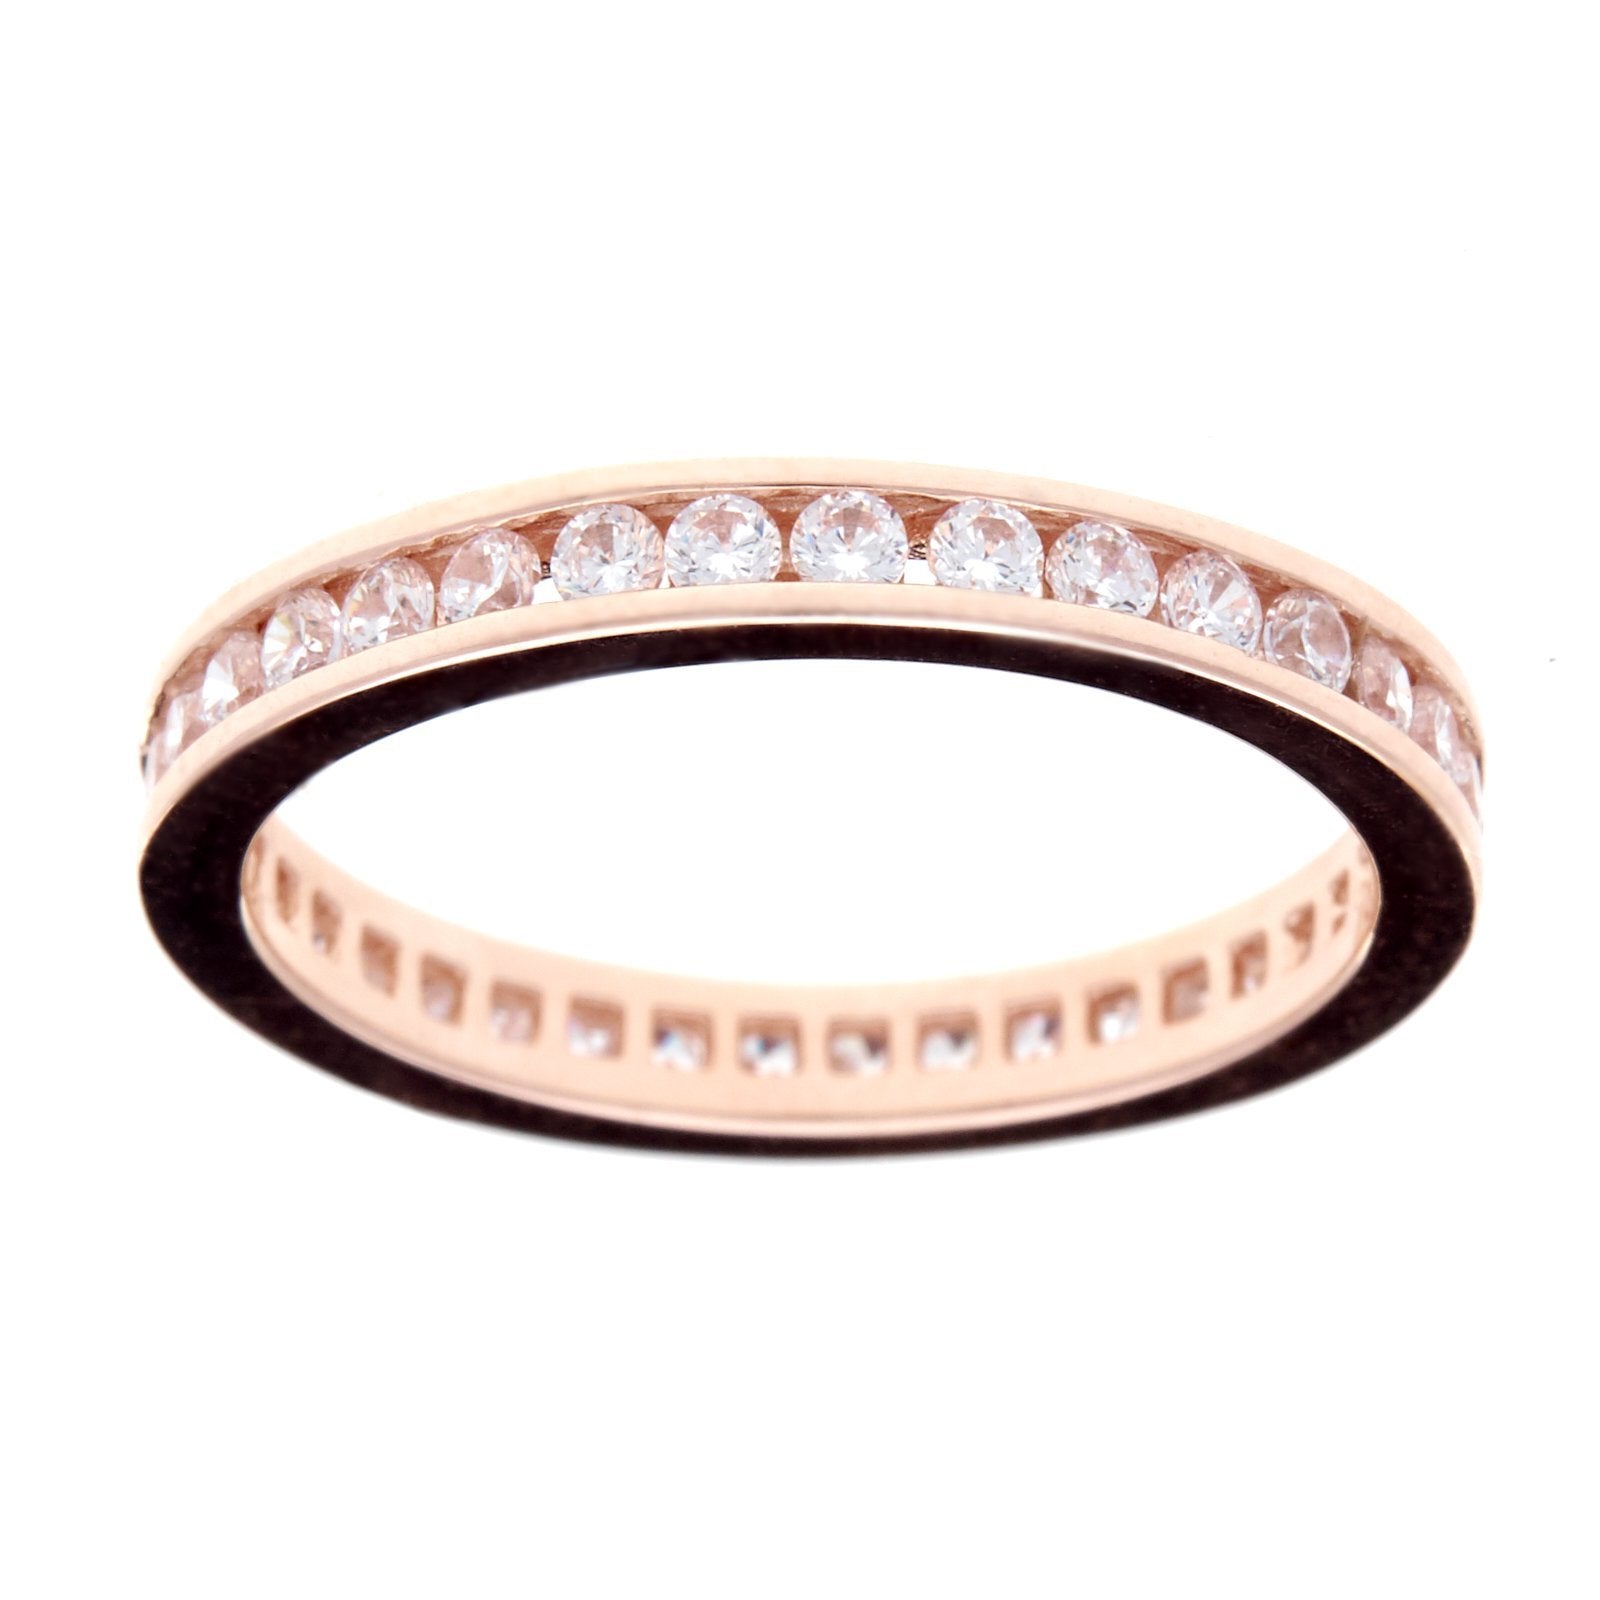 Sybella Rings Sybella rose gold eternity ring